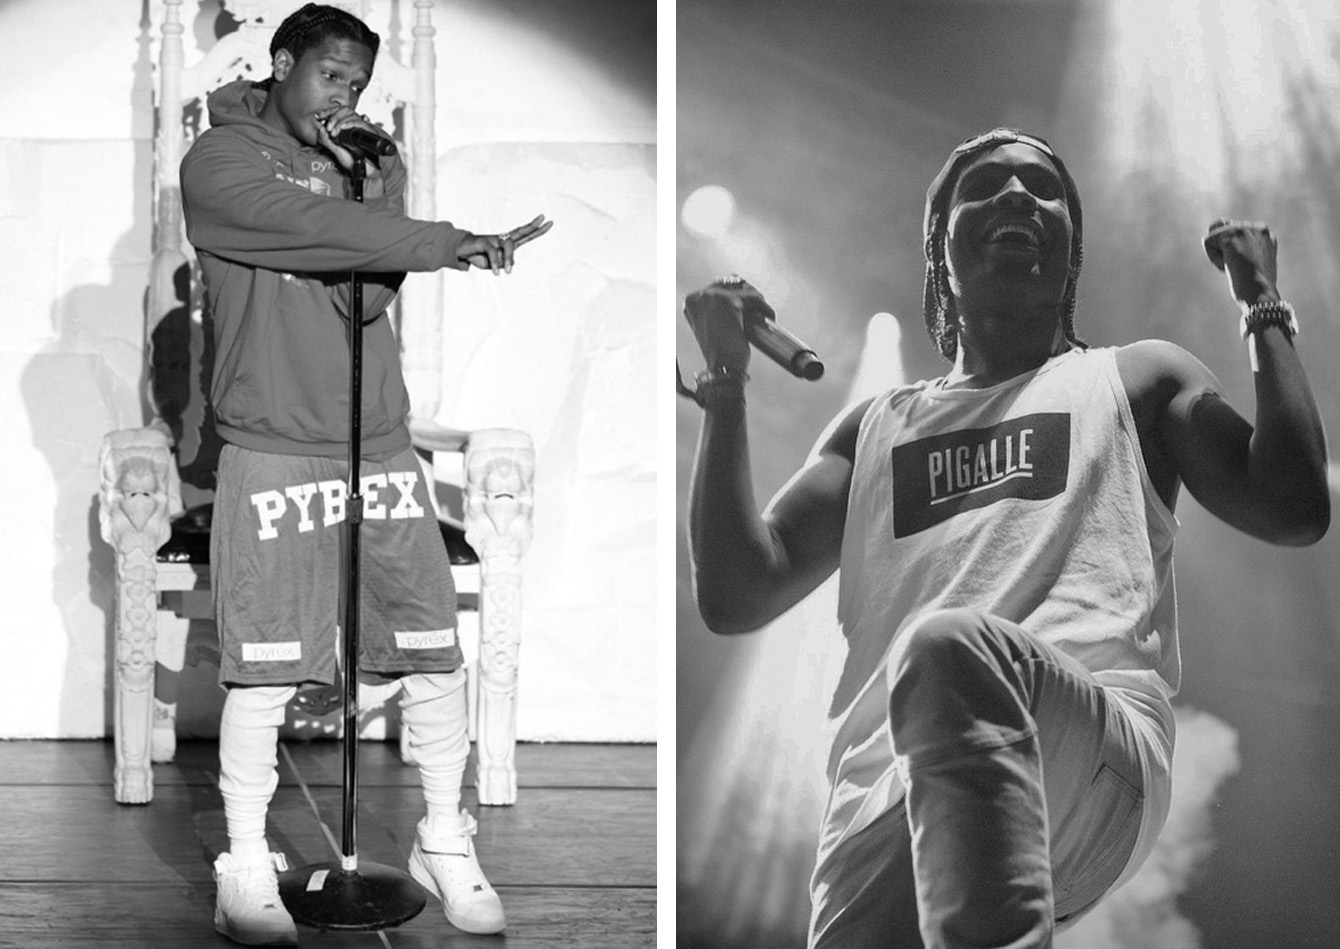 https://solesavy.com/wp-content/uploads/2021/10/why-asap-rocky-is-forever-first-live-love-asap-10th-anniversary-6.jpg